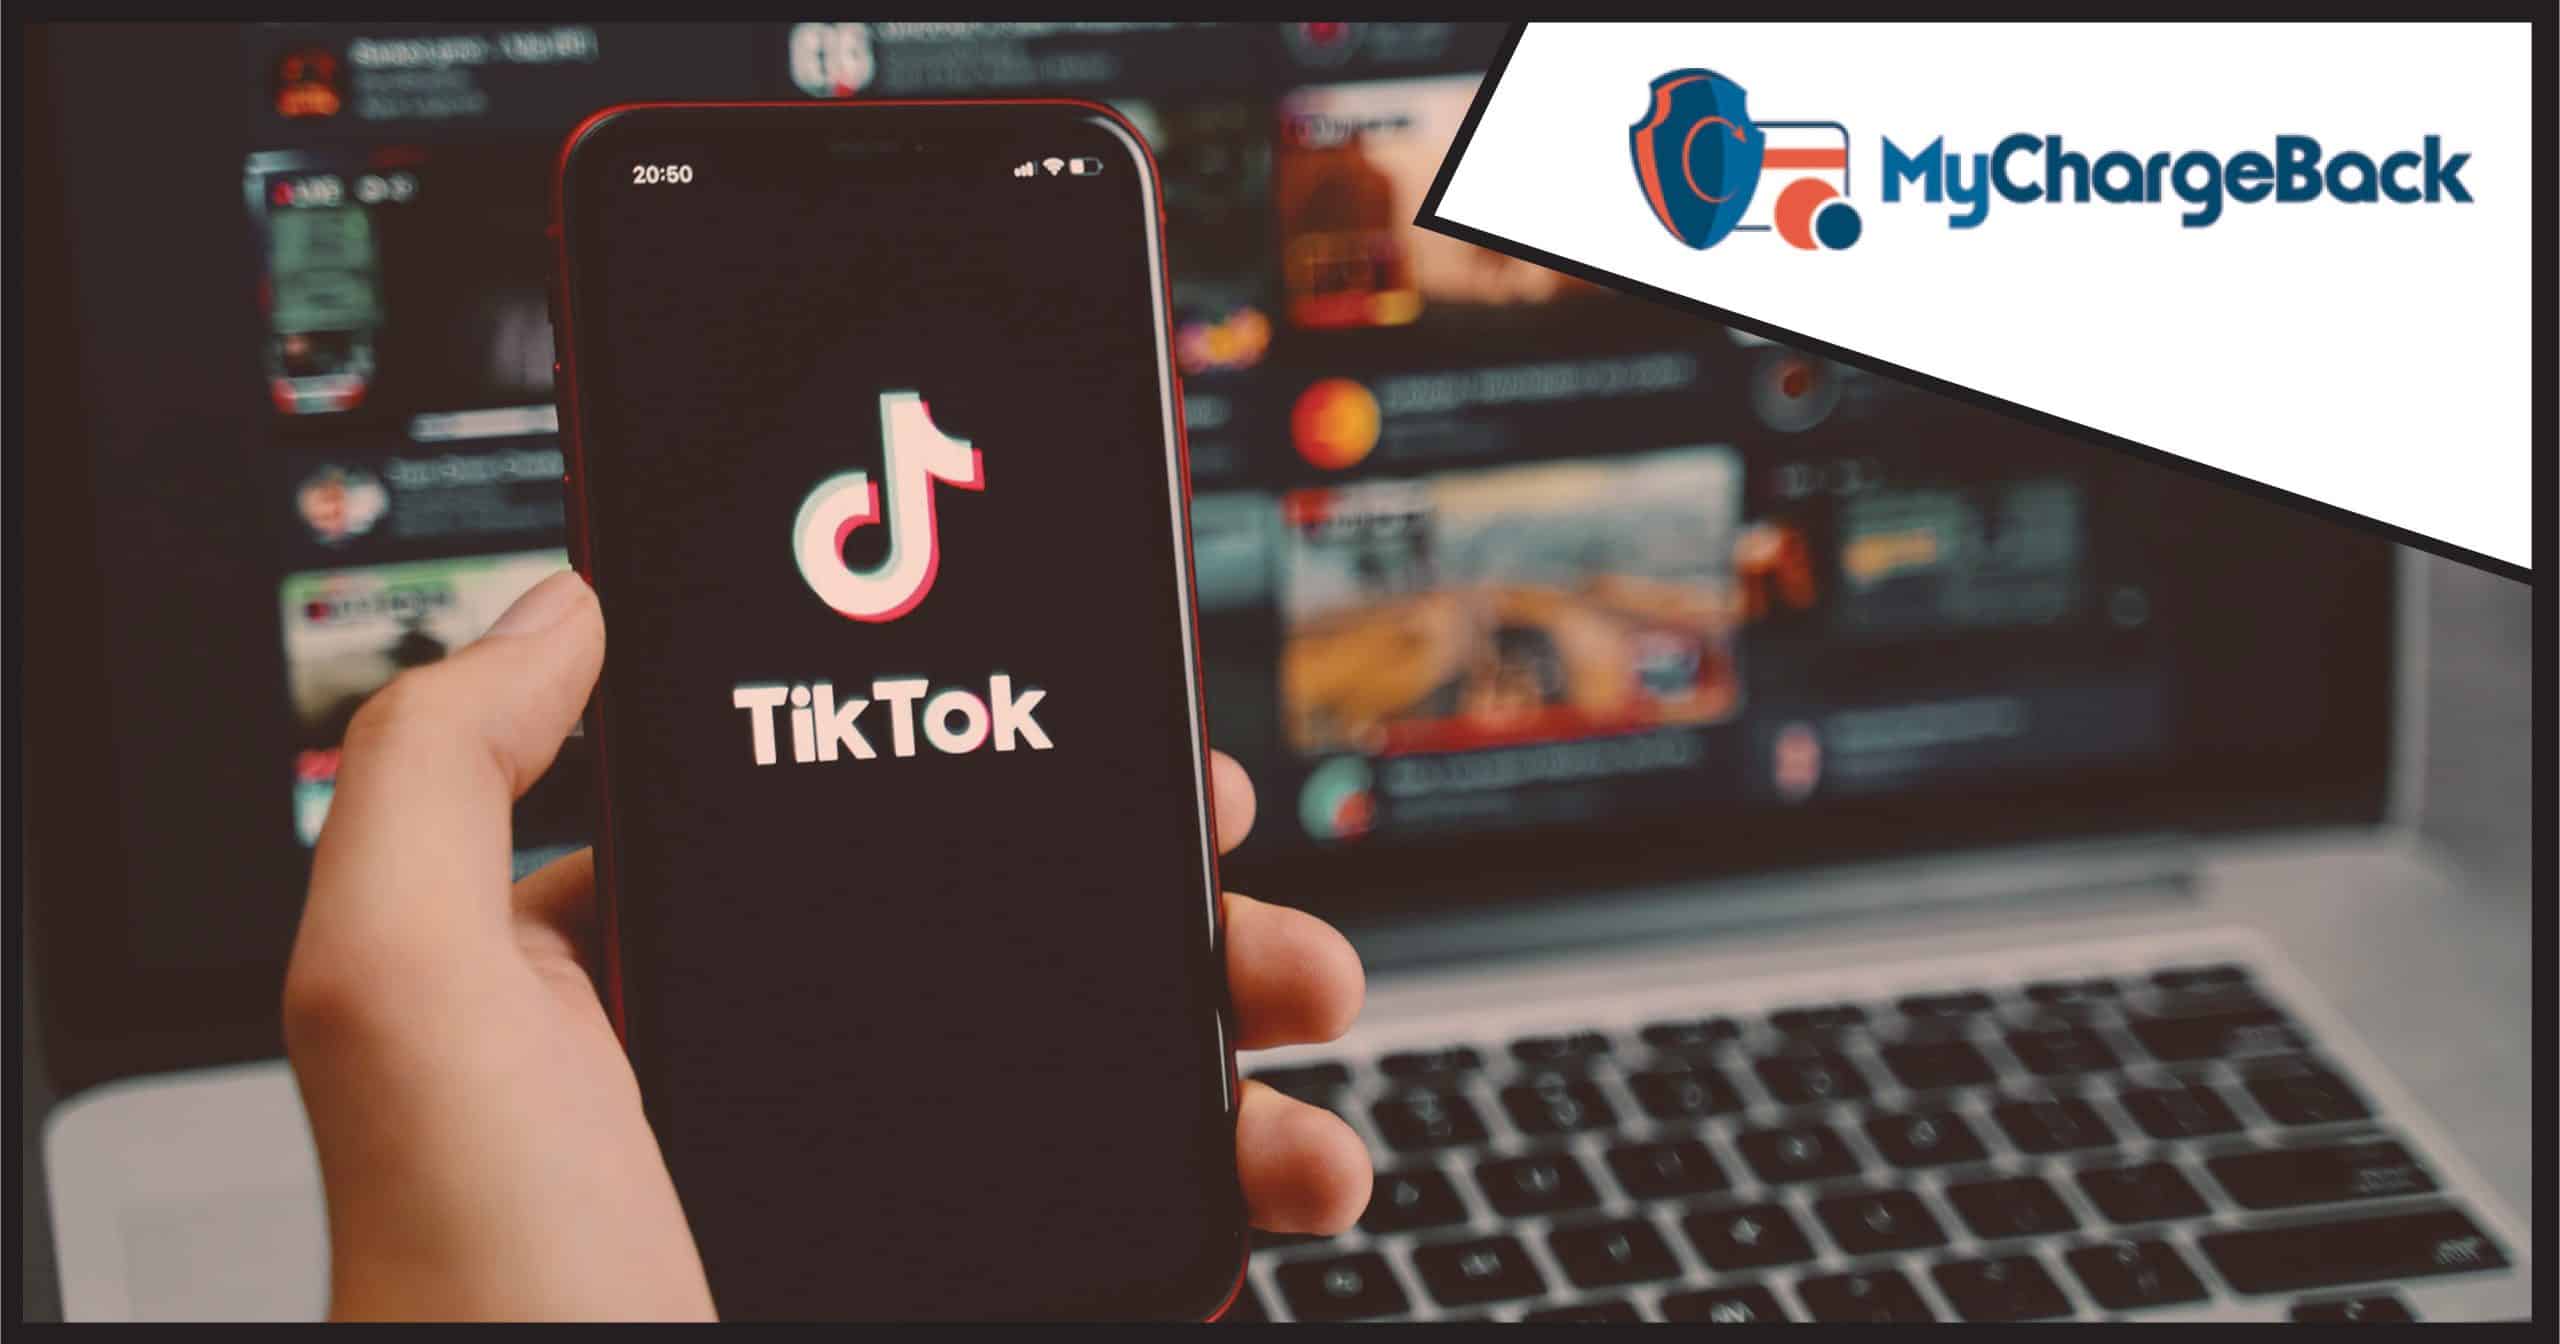 An image showing TikTok's logo, used to illustrate a trend of TikTok crypto investment scams